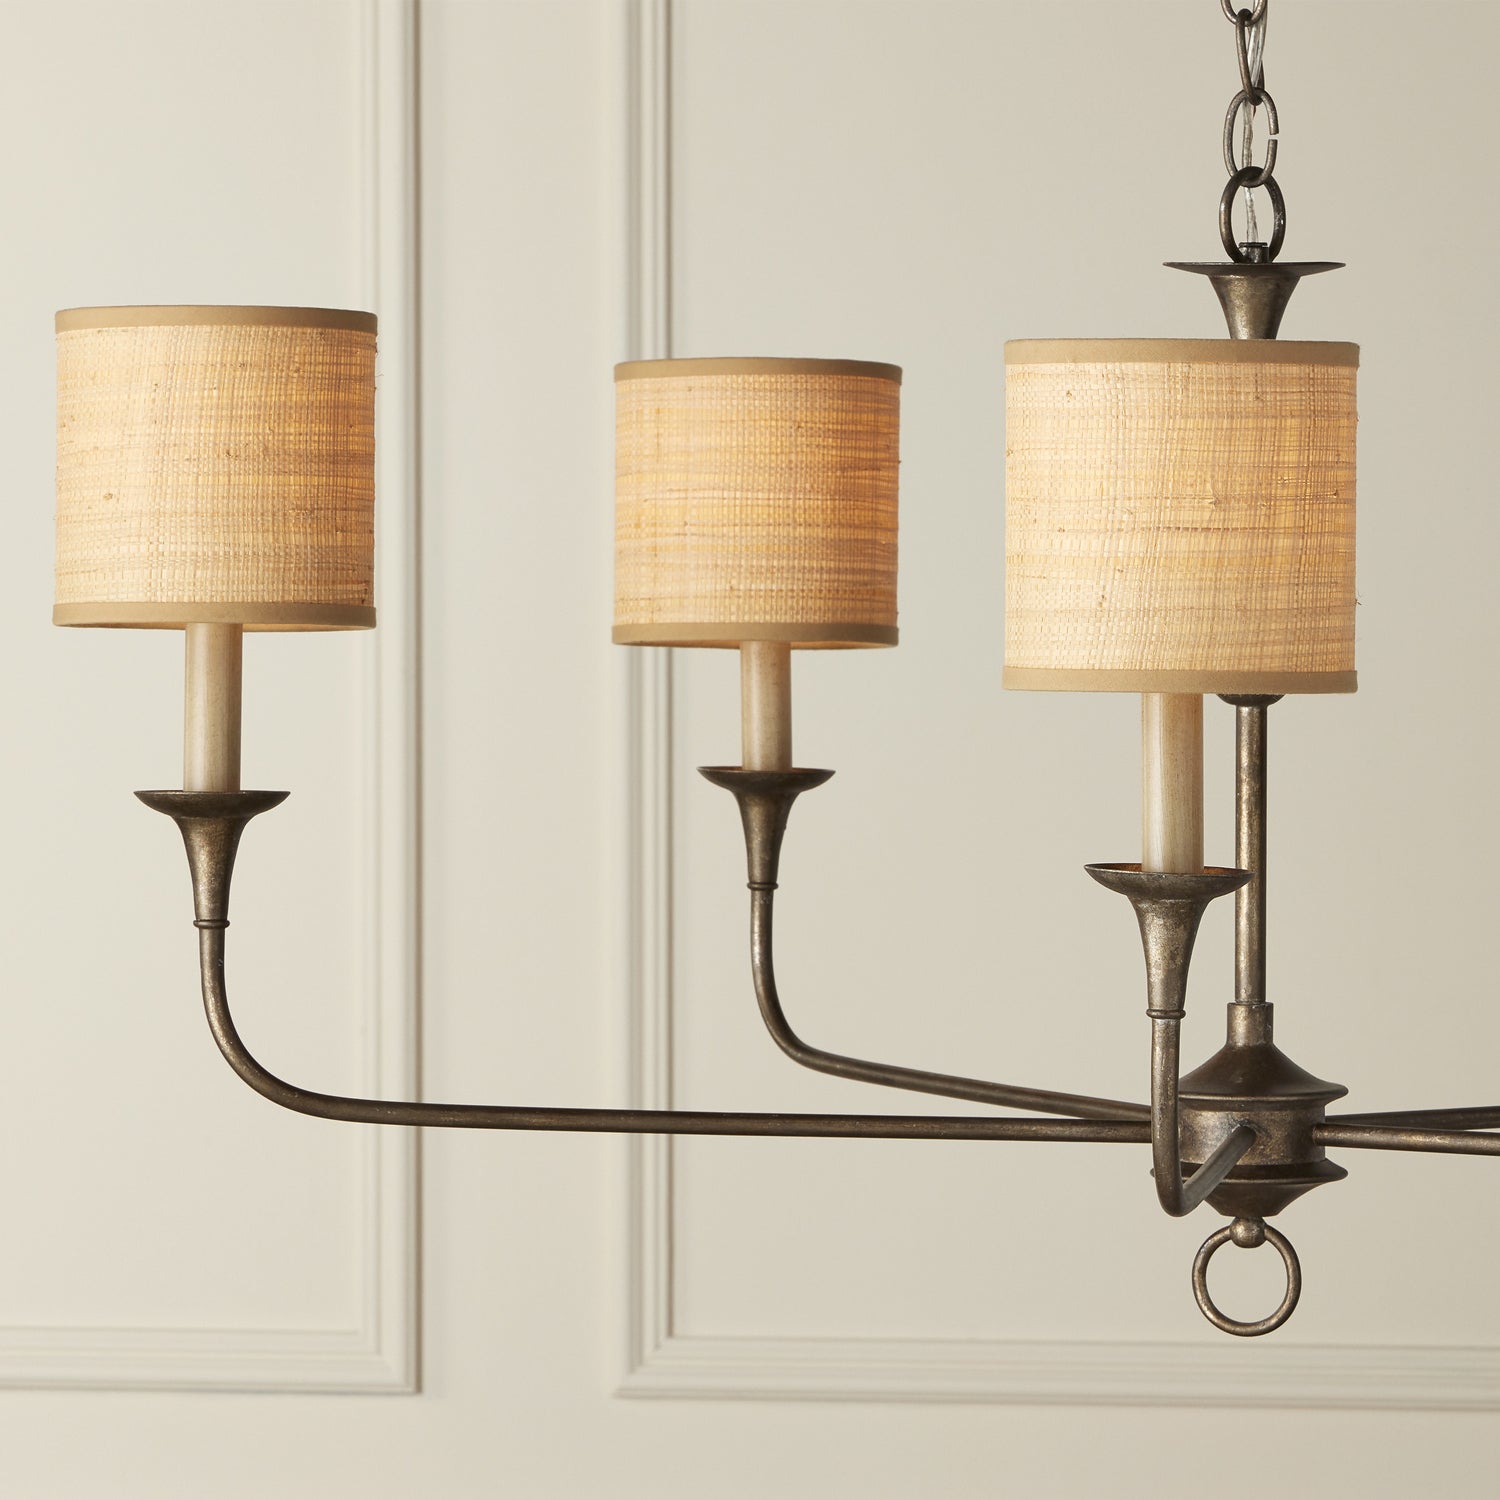 Chandelier Shade in Natural finish